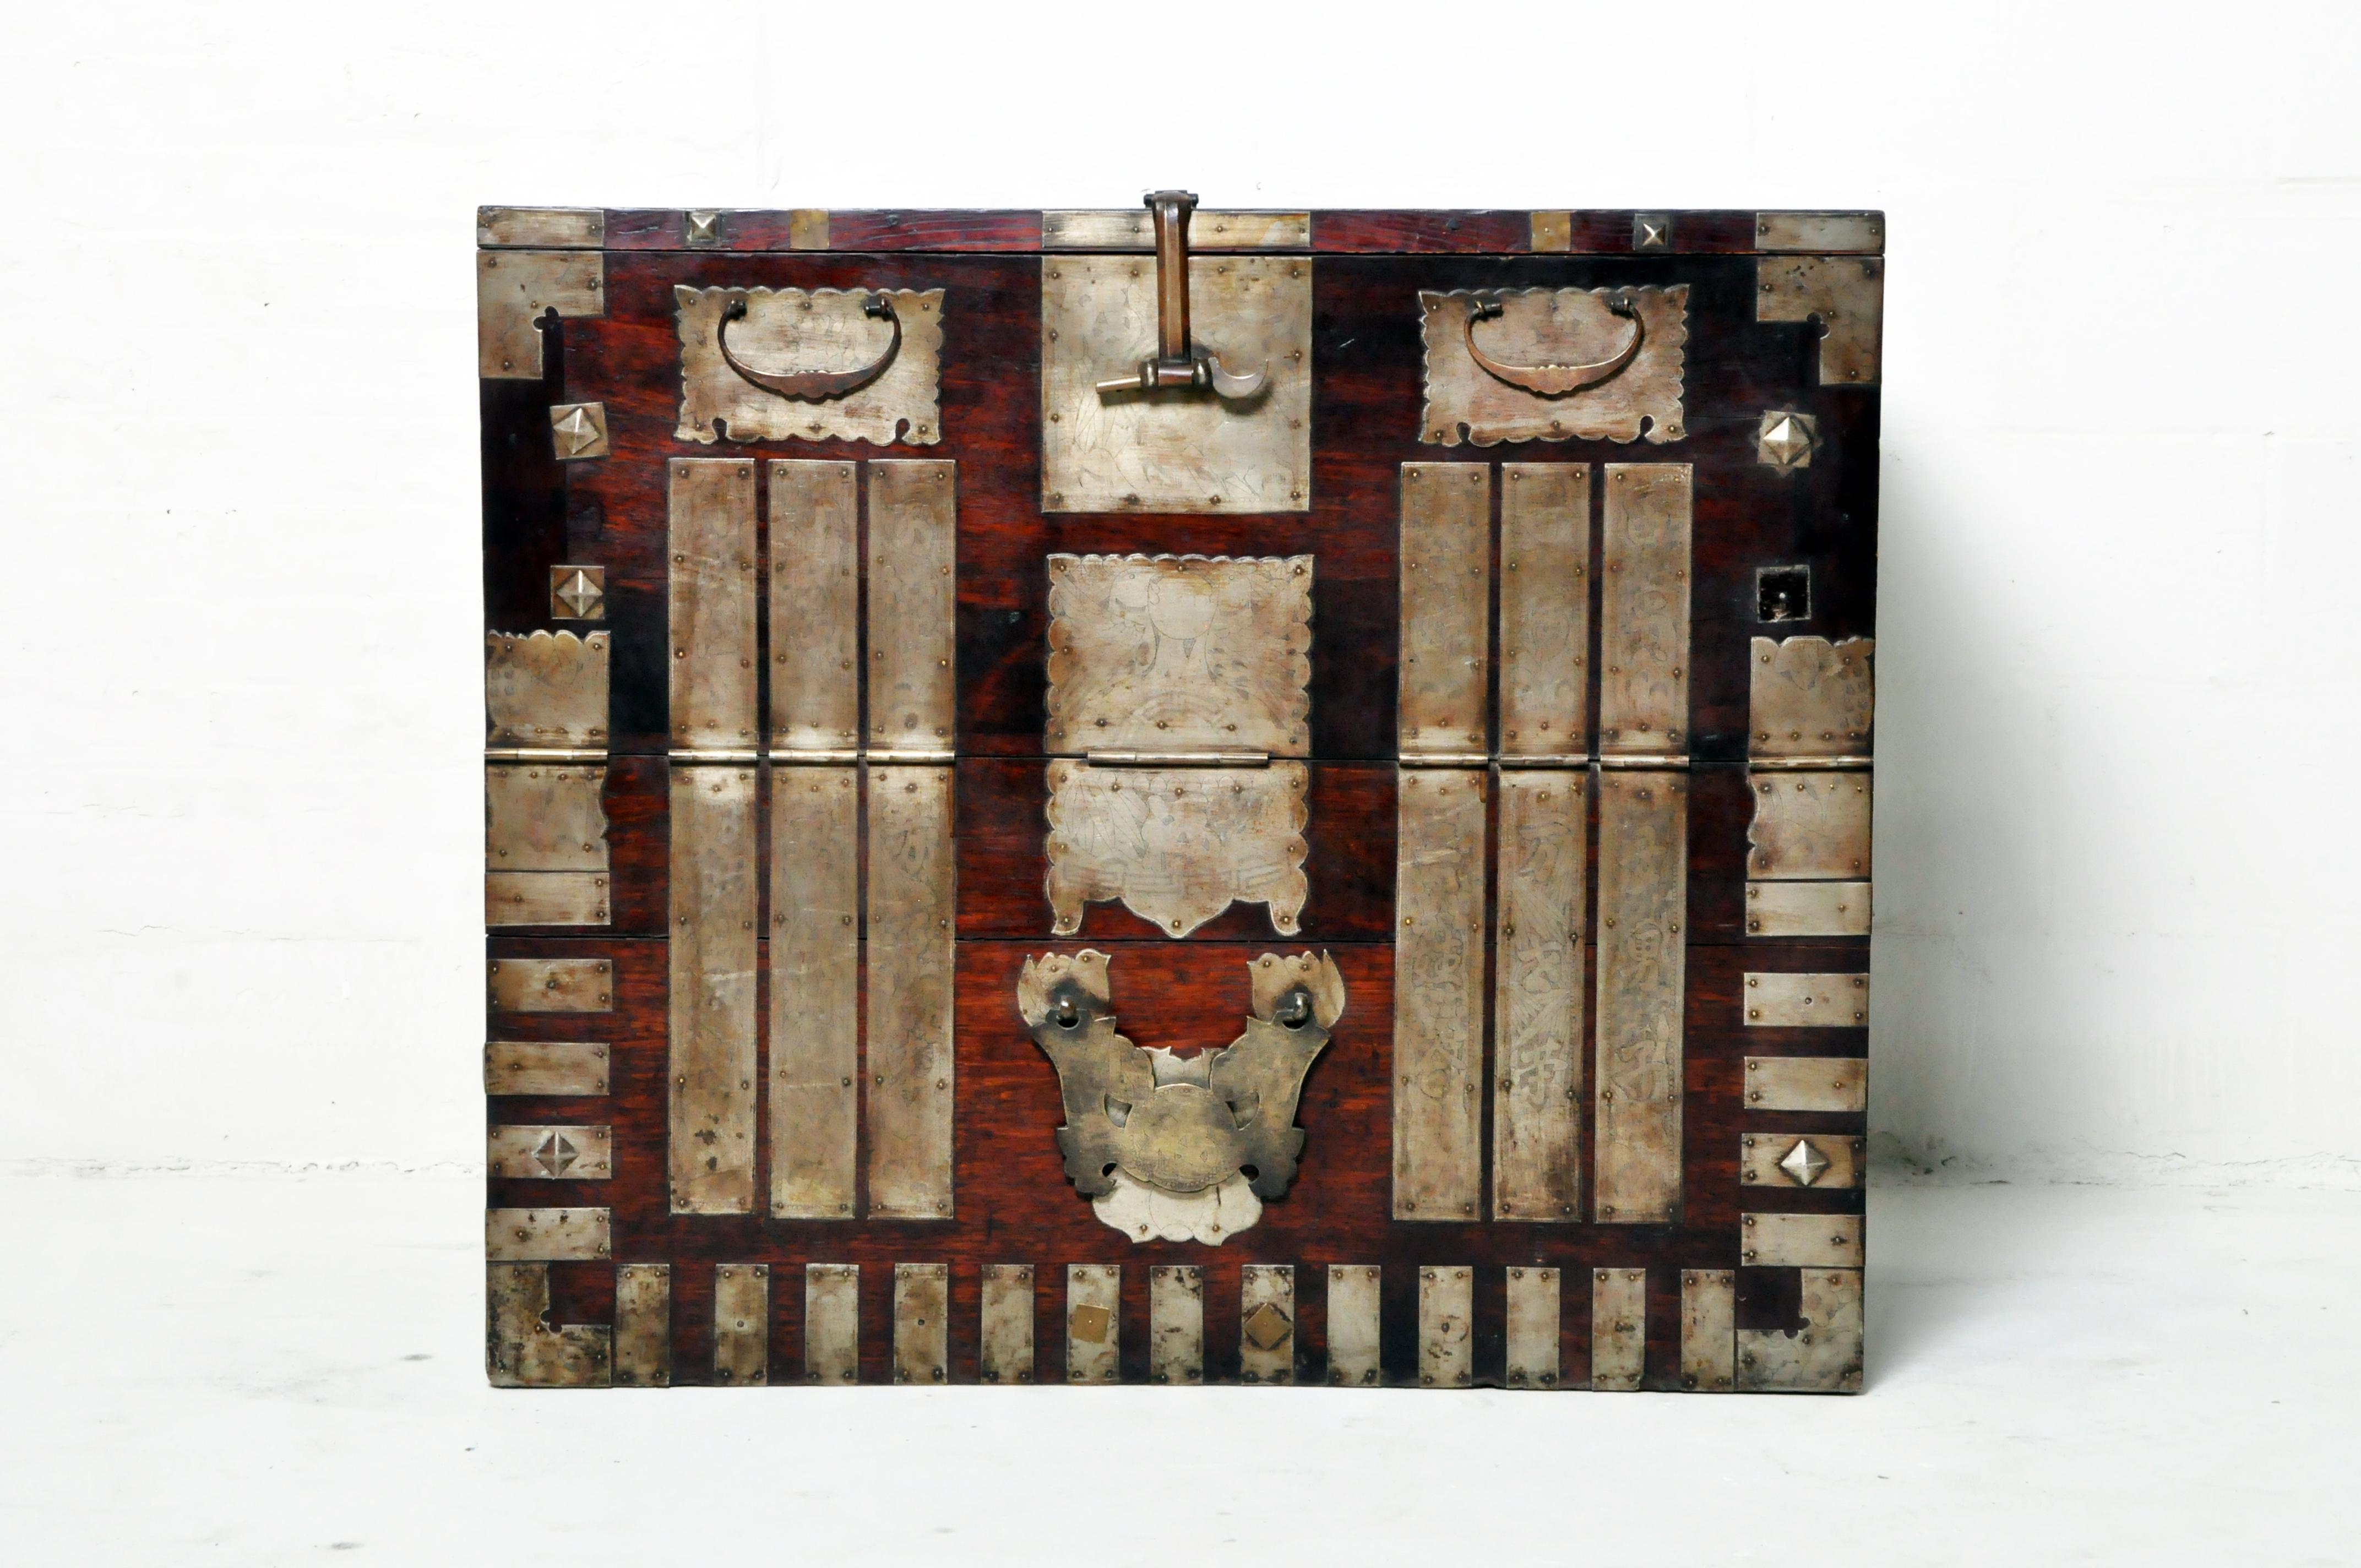 This simple Korean chest once contained blankets and clothing items given as part of a marriage dowry. The elaborate hardware is made from a tin alloy and has been engraved with auspicious patterns. The interior of the chest has been cleaned and